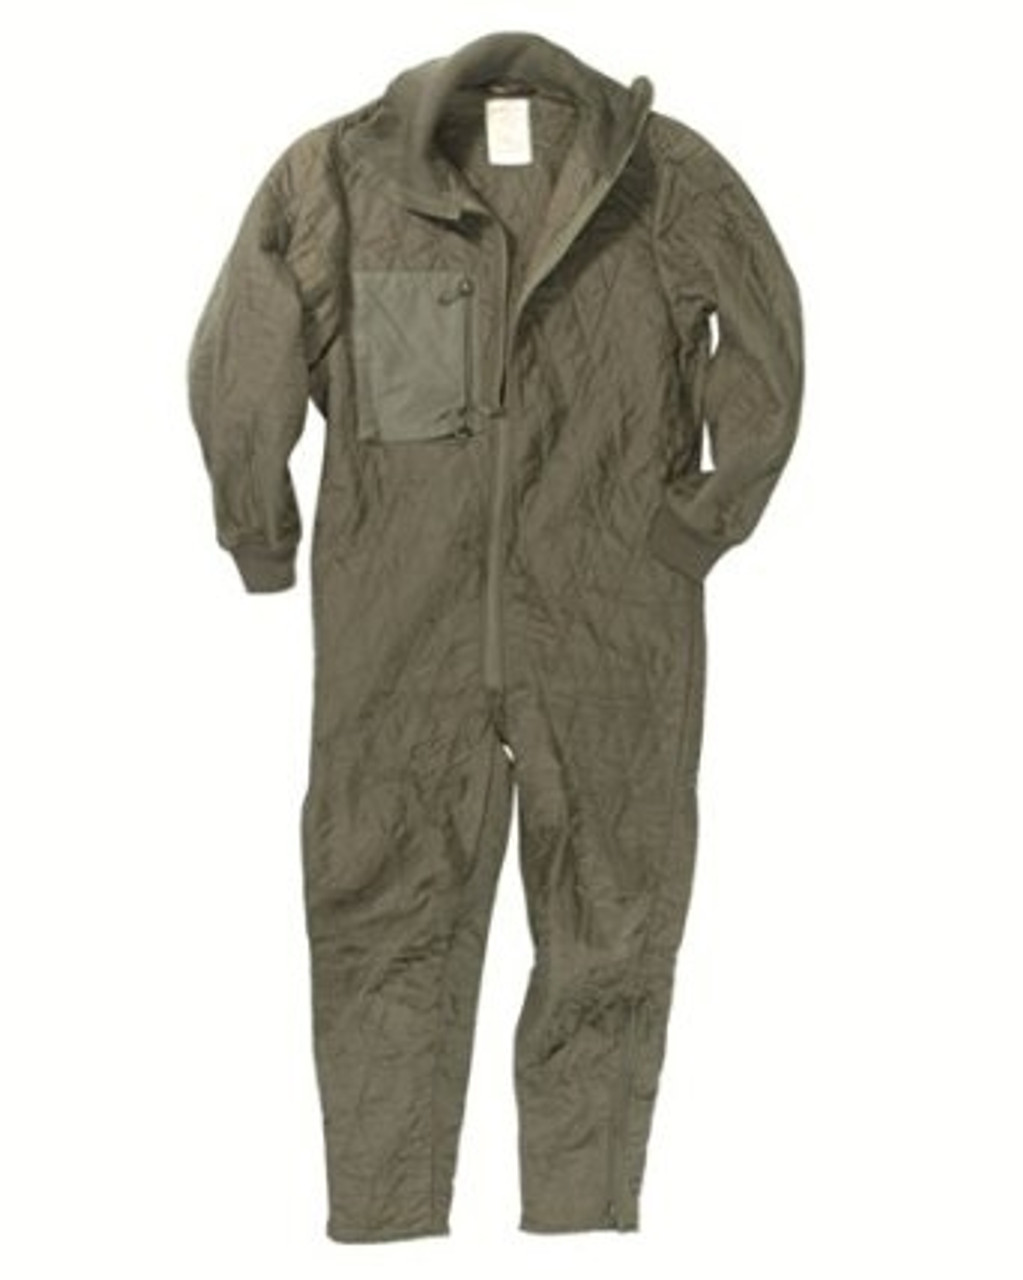 BW OD Tanker Coverall Liner from Hessen Surplus